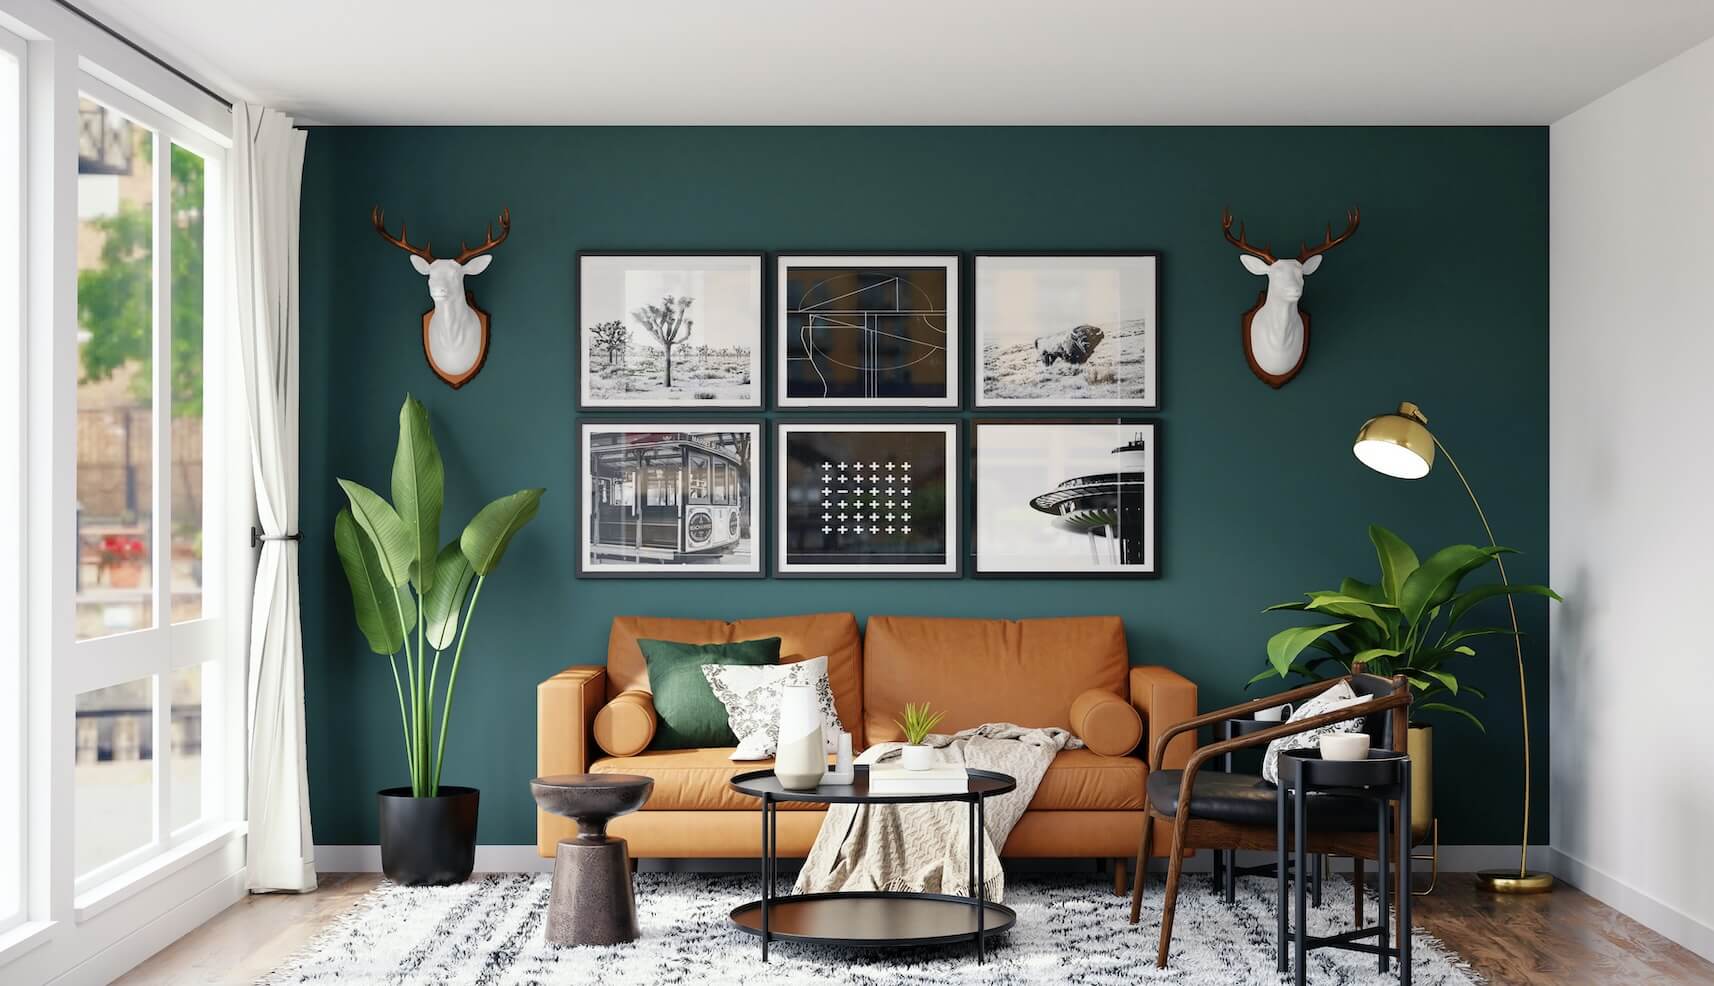 The Top 10 Interior Design Trends of 2023: What’s In and What’s Out